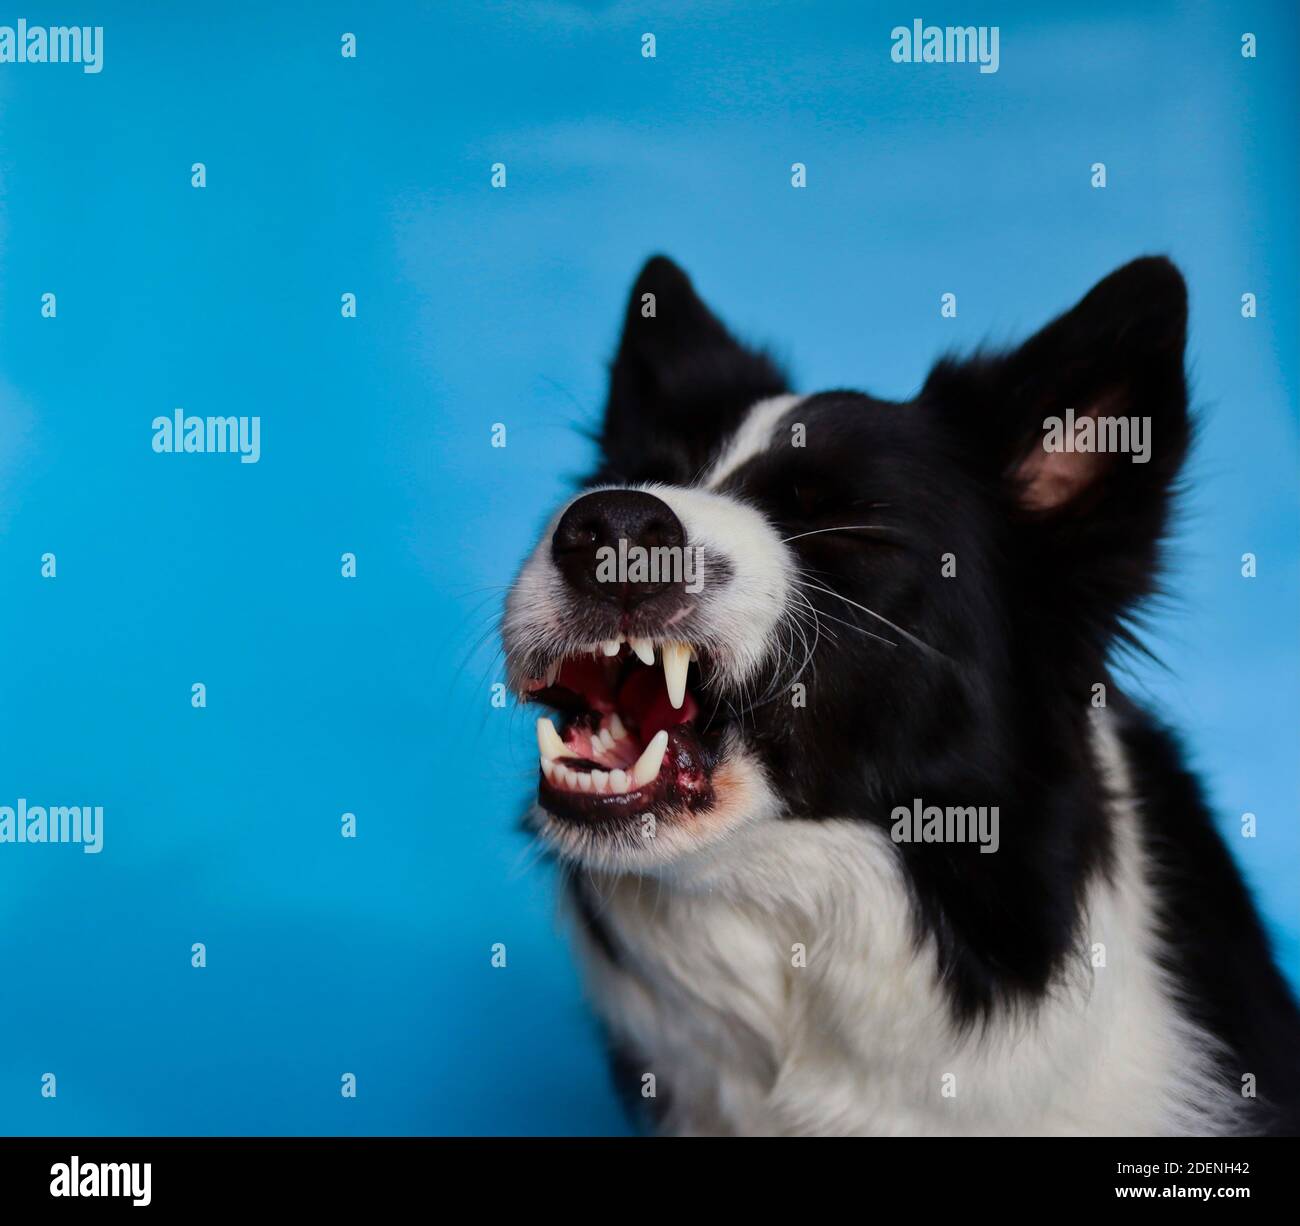 Funny Border Collie Yawns and Shows its Teeth Isolated on Blue. Close-up of Black and White Dog Head. Stock Photo